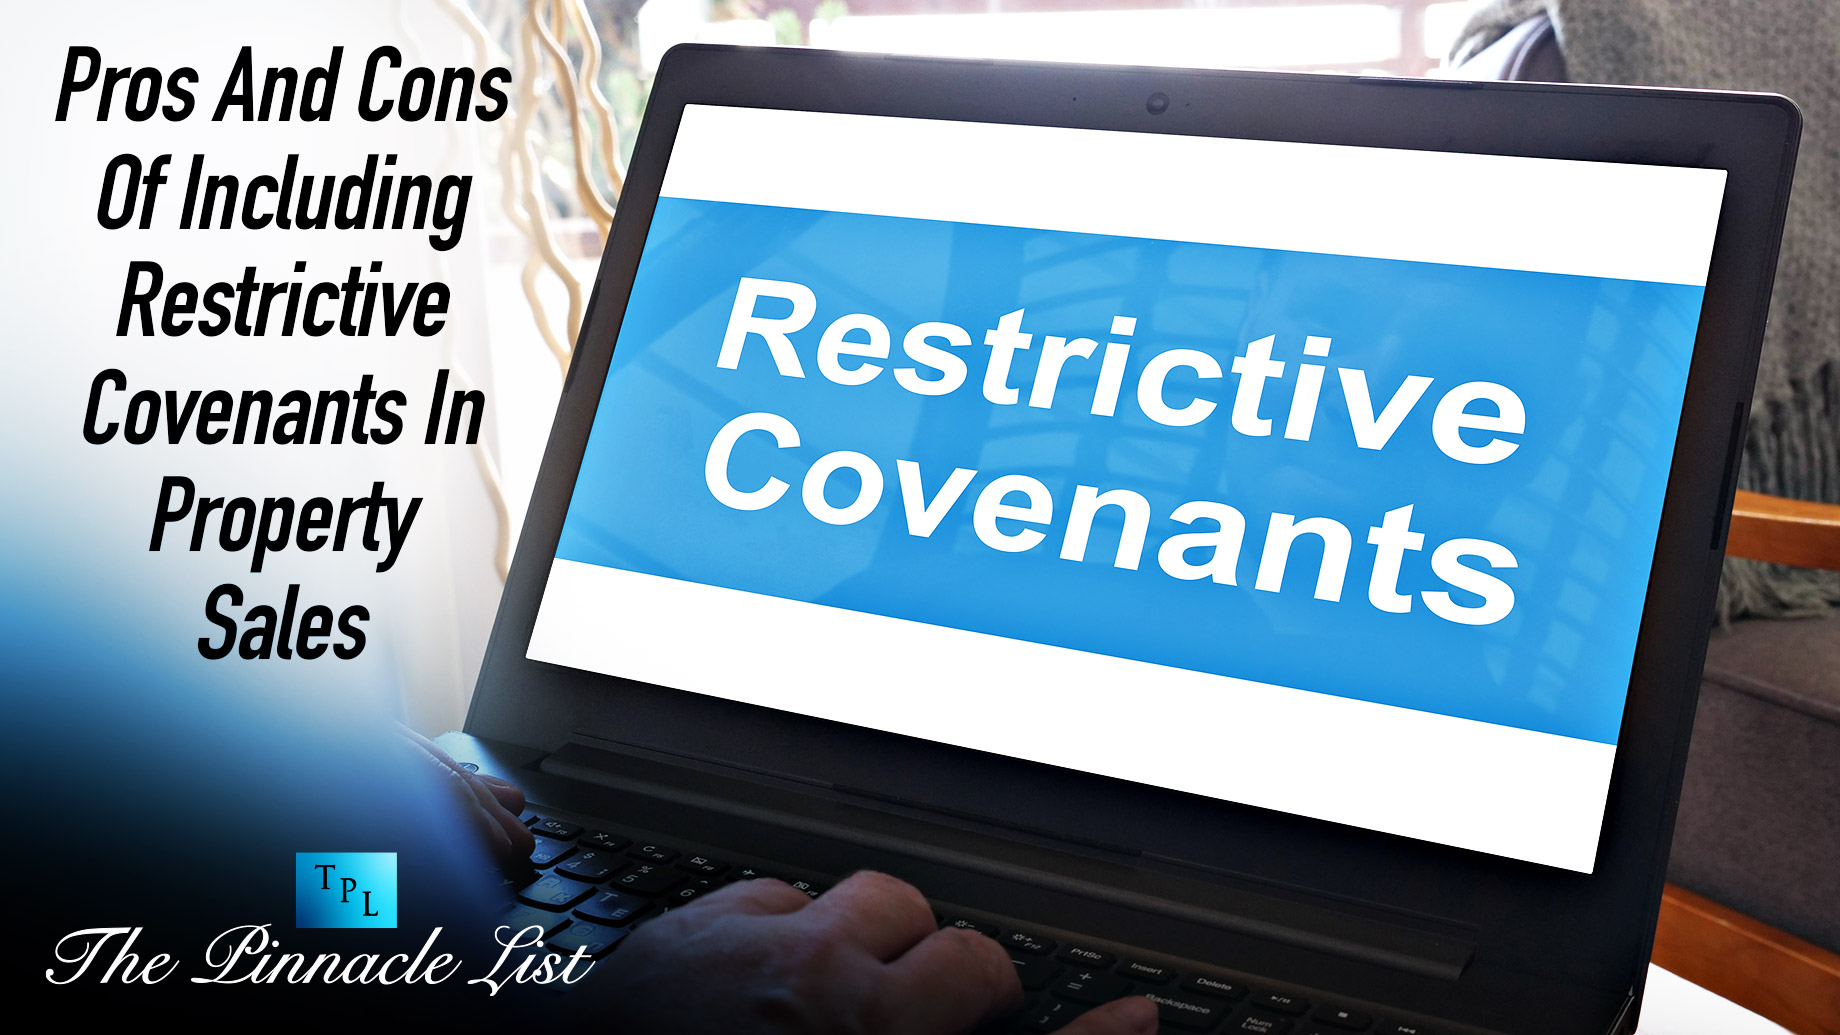 Pros And Cons Of Including Restrictive Covenants In Property Sales